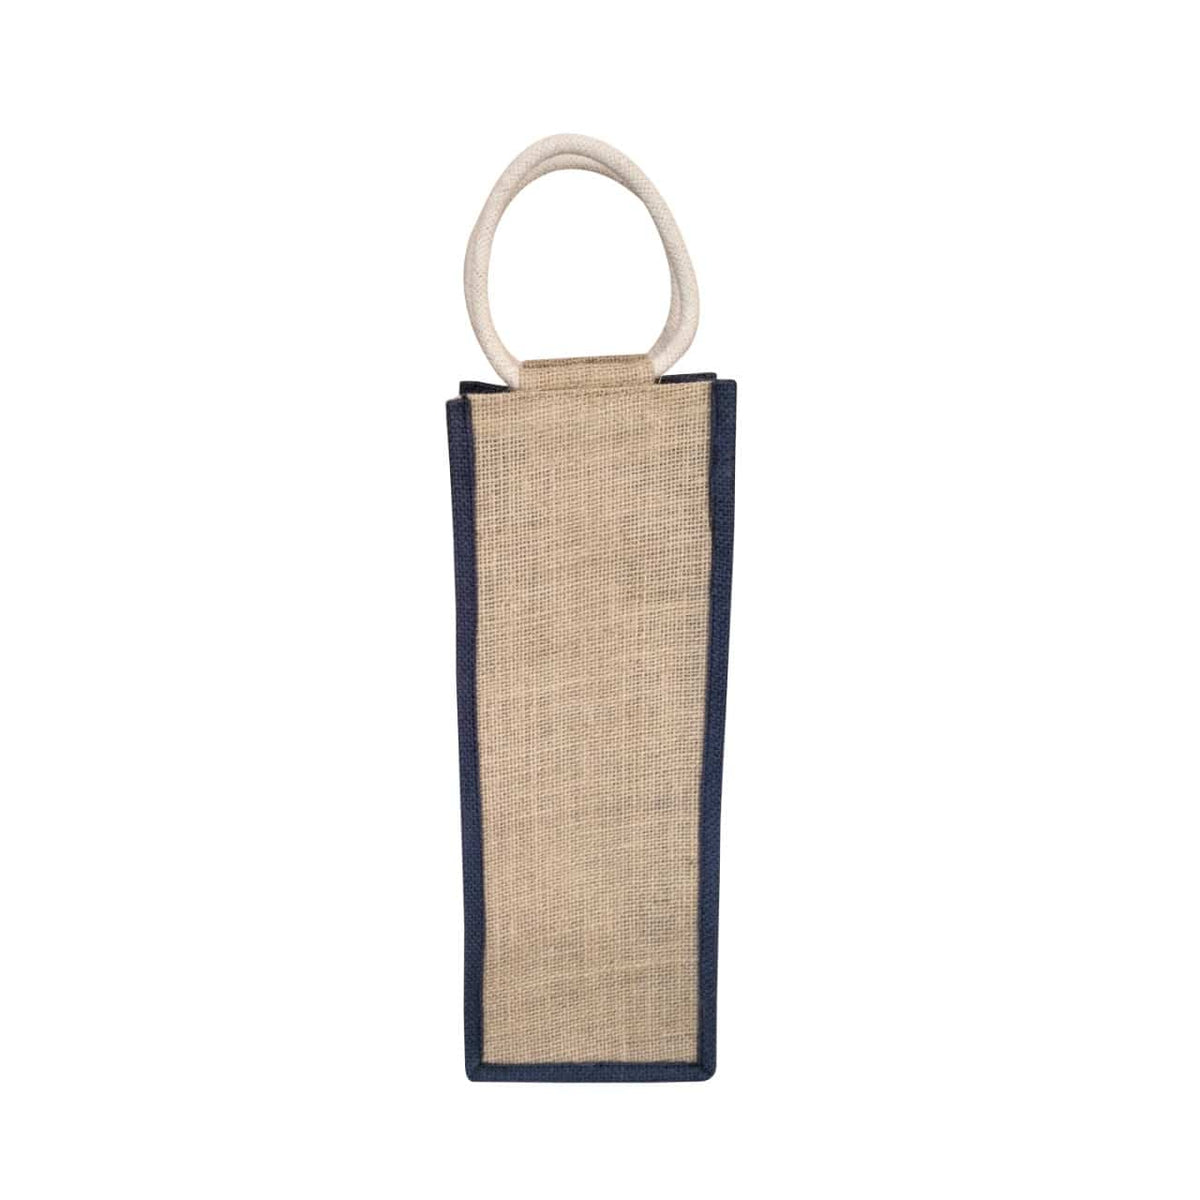 jute water bottle bag, sustainable, product size 14″”x 5 x″4.5, protection from strains and scratches